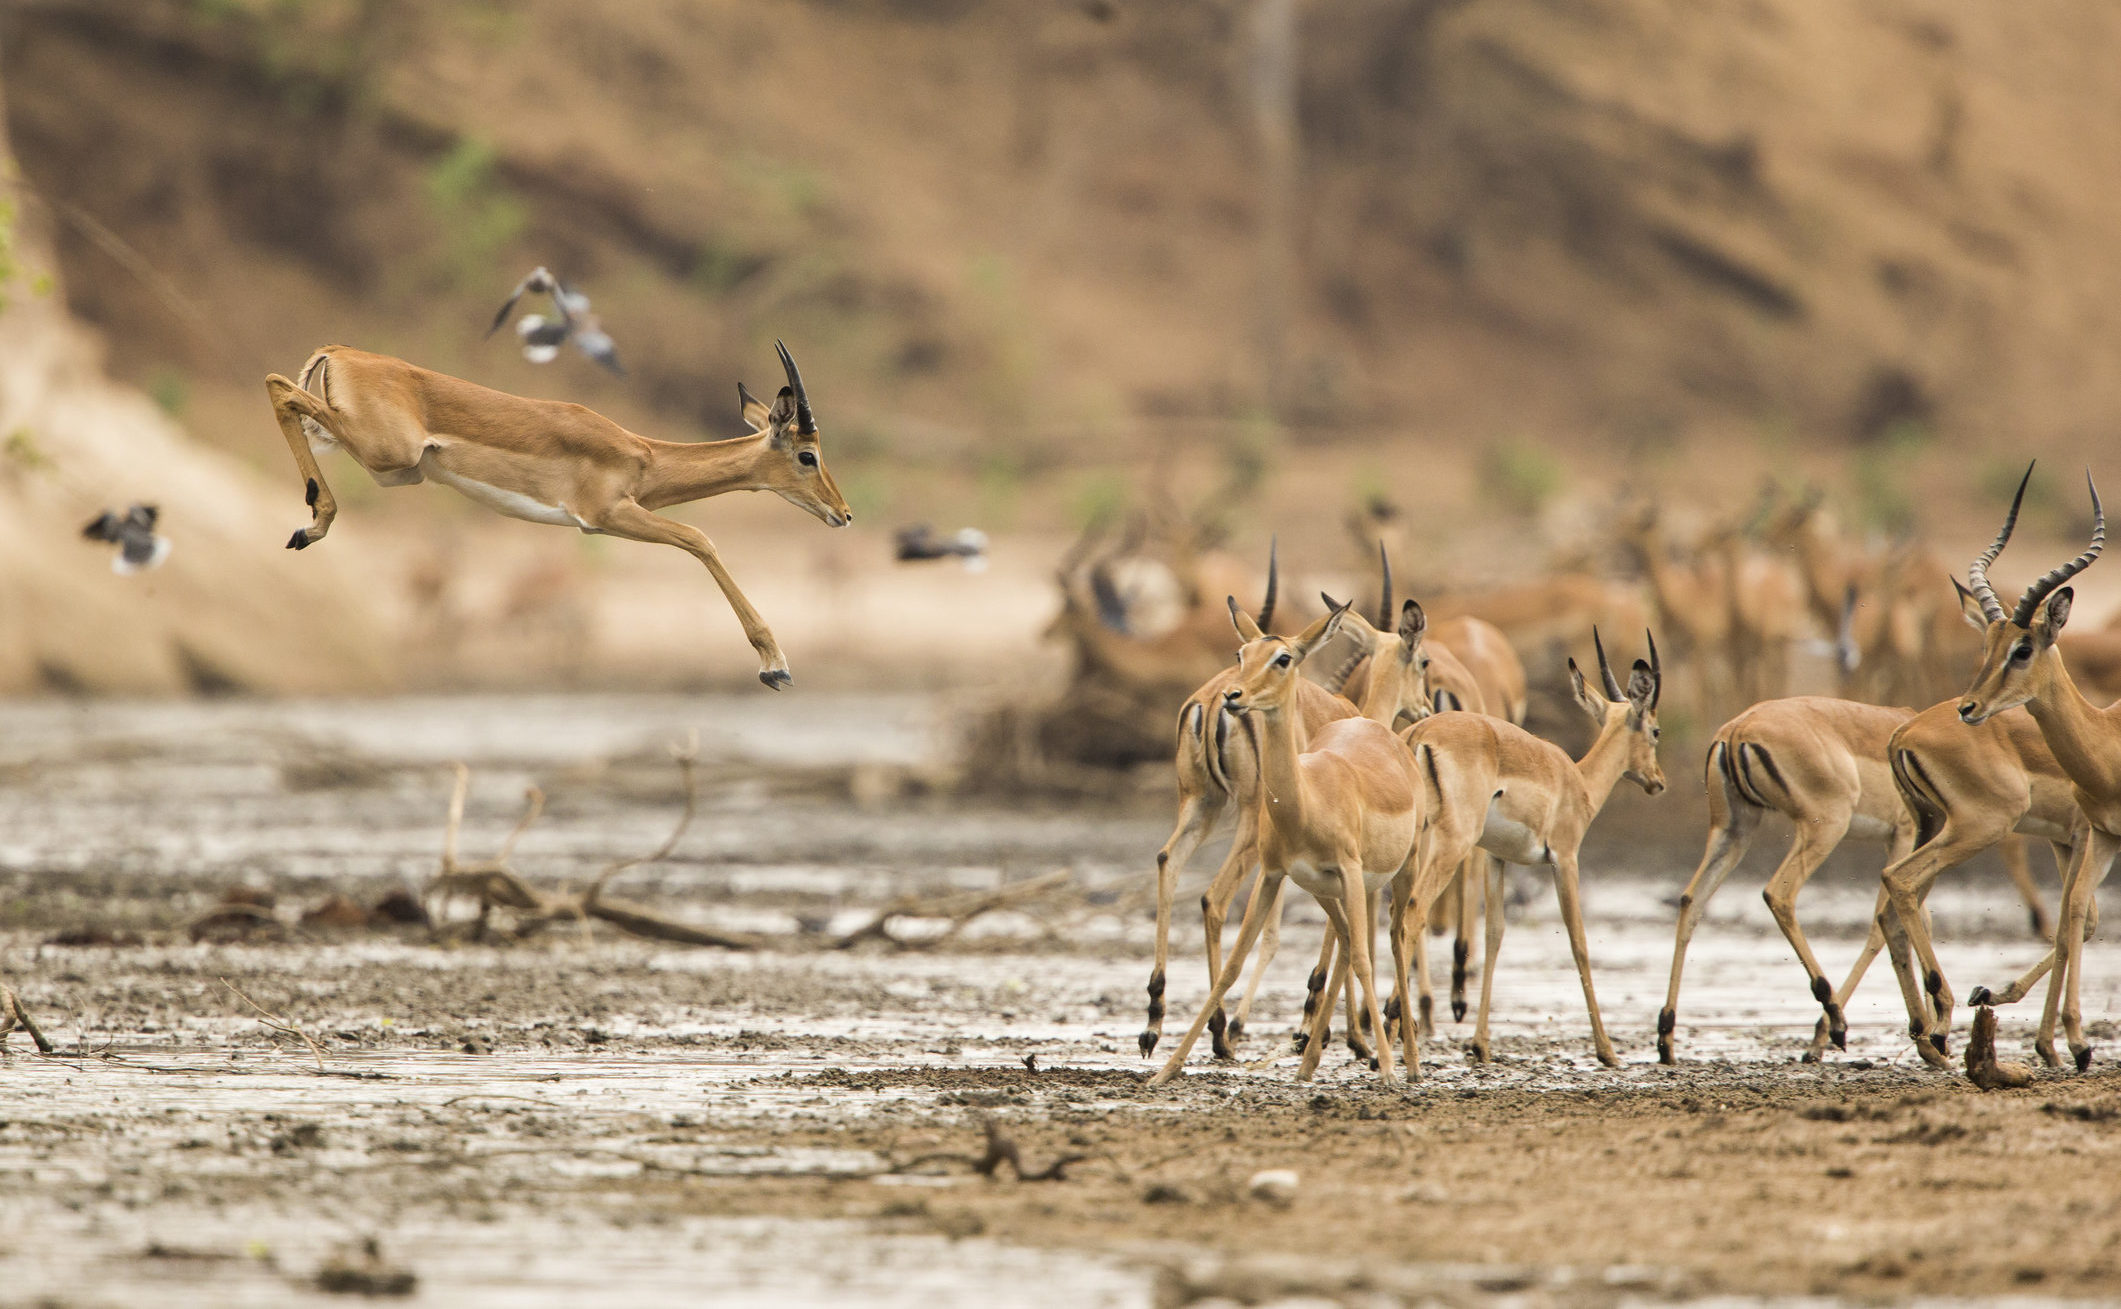 Witness extraordinary Zimbabwe wildlife like this springing impala in Mana Pools National Park when you take a tailor-made holiday with Alfred&.